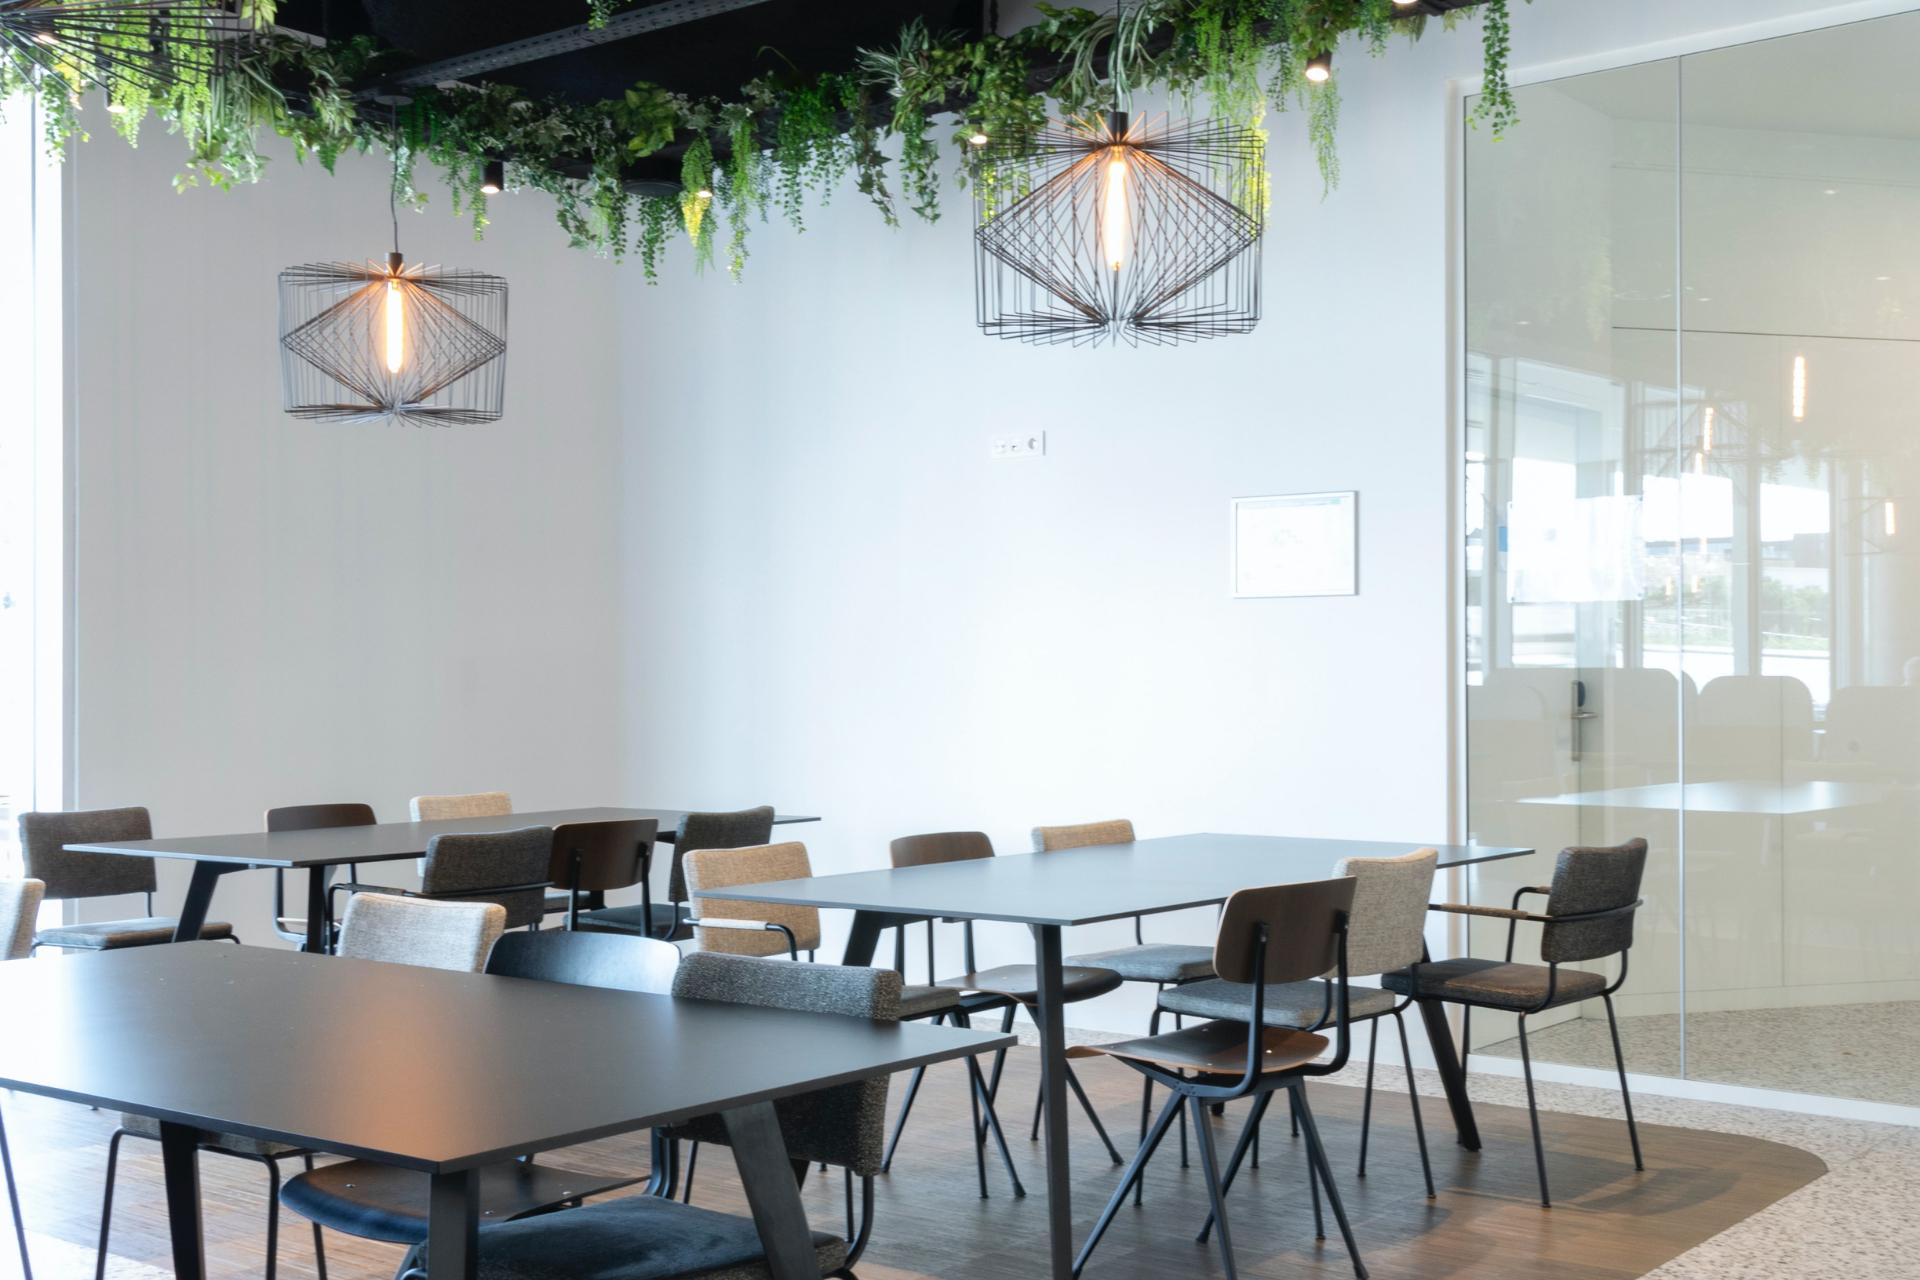 Small modern restaurant decoration with plants